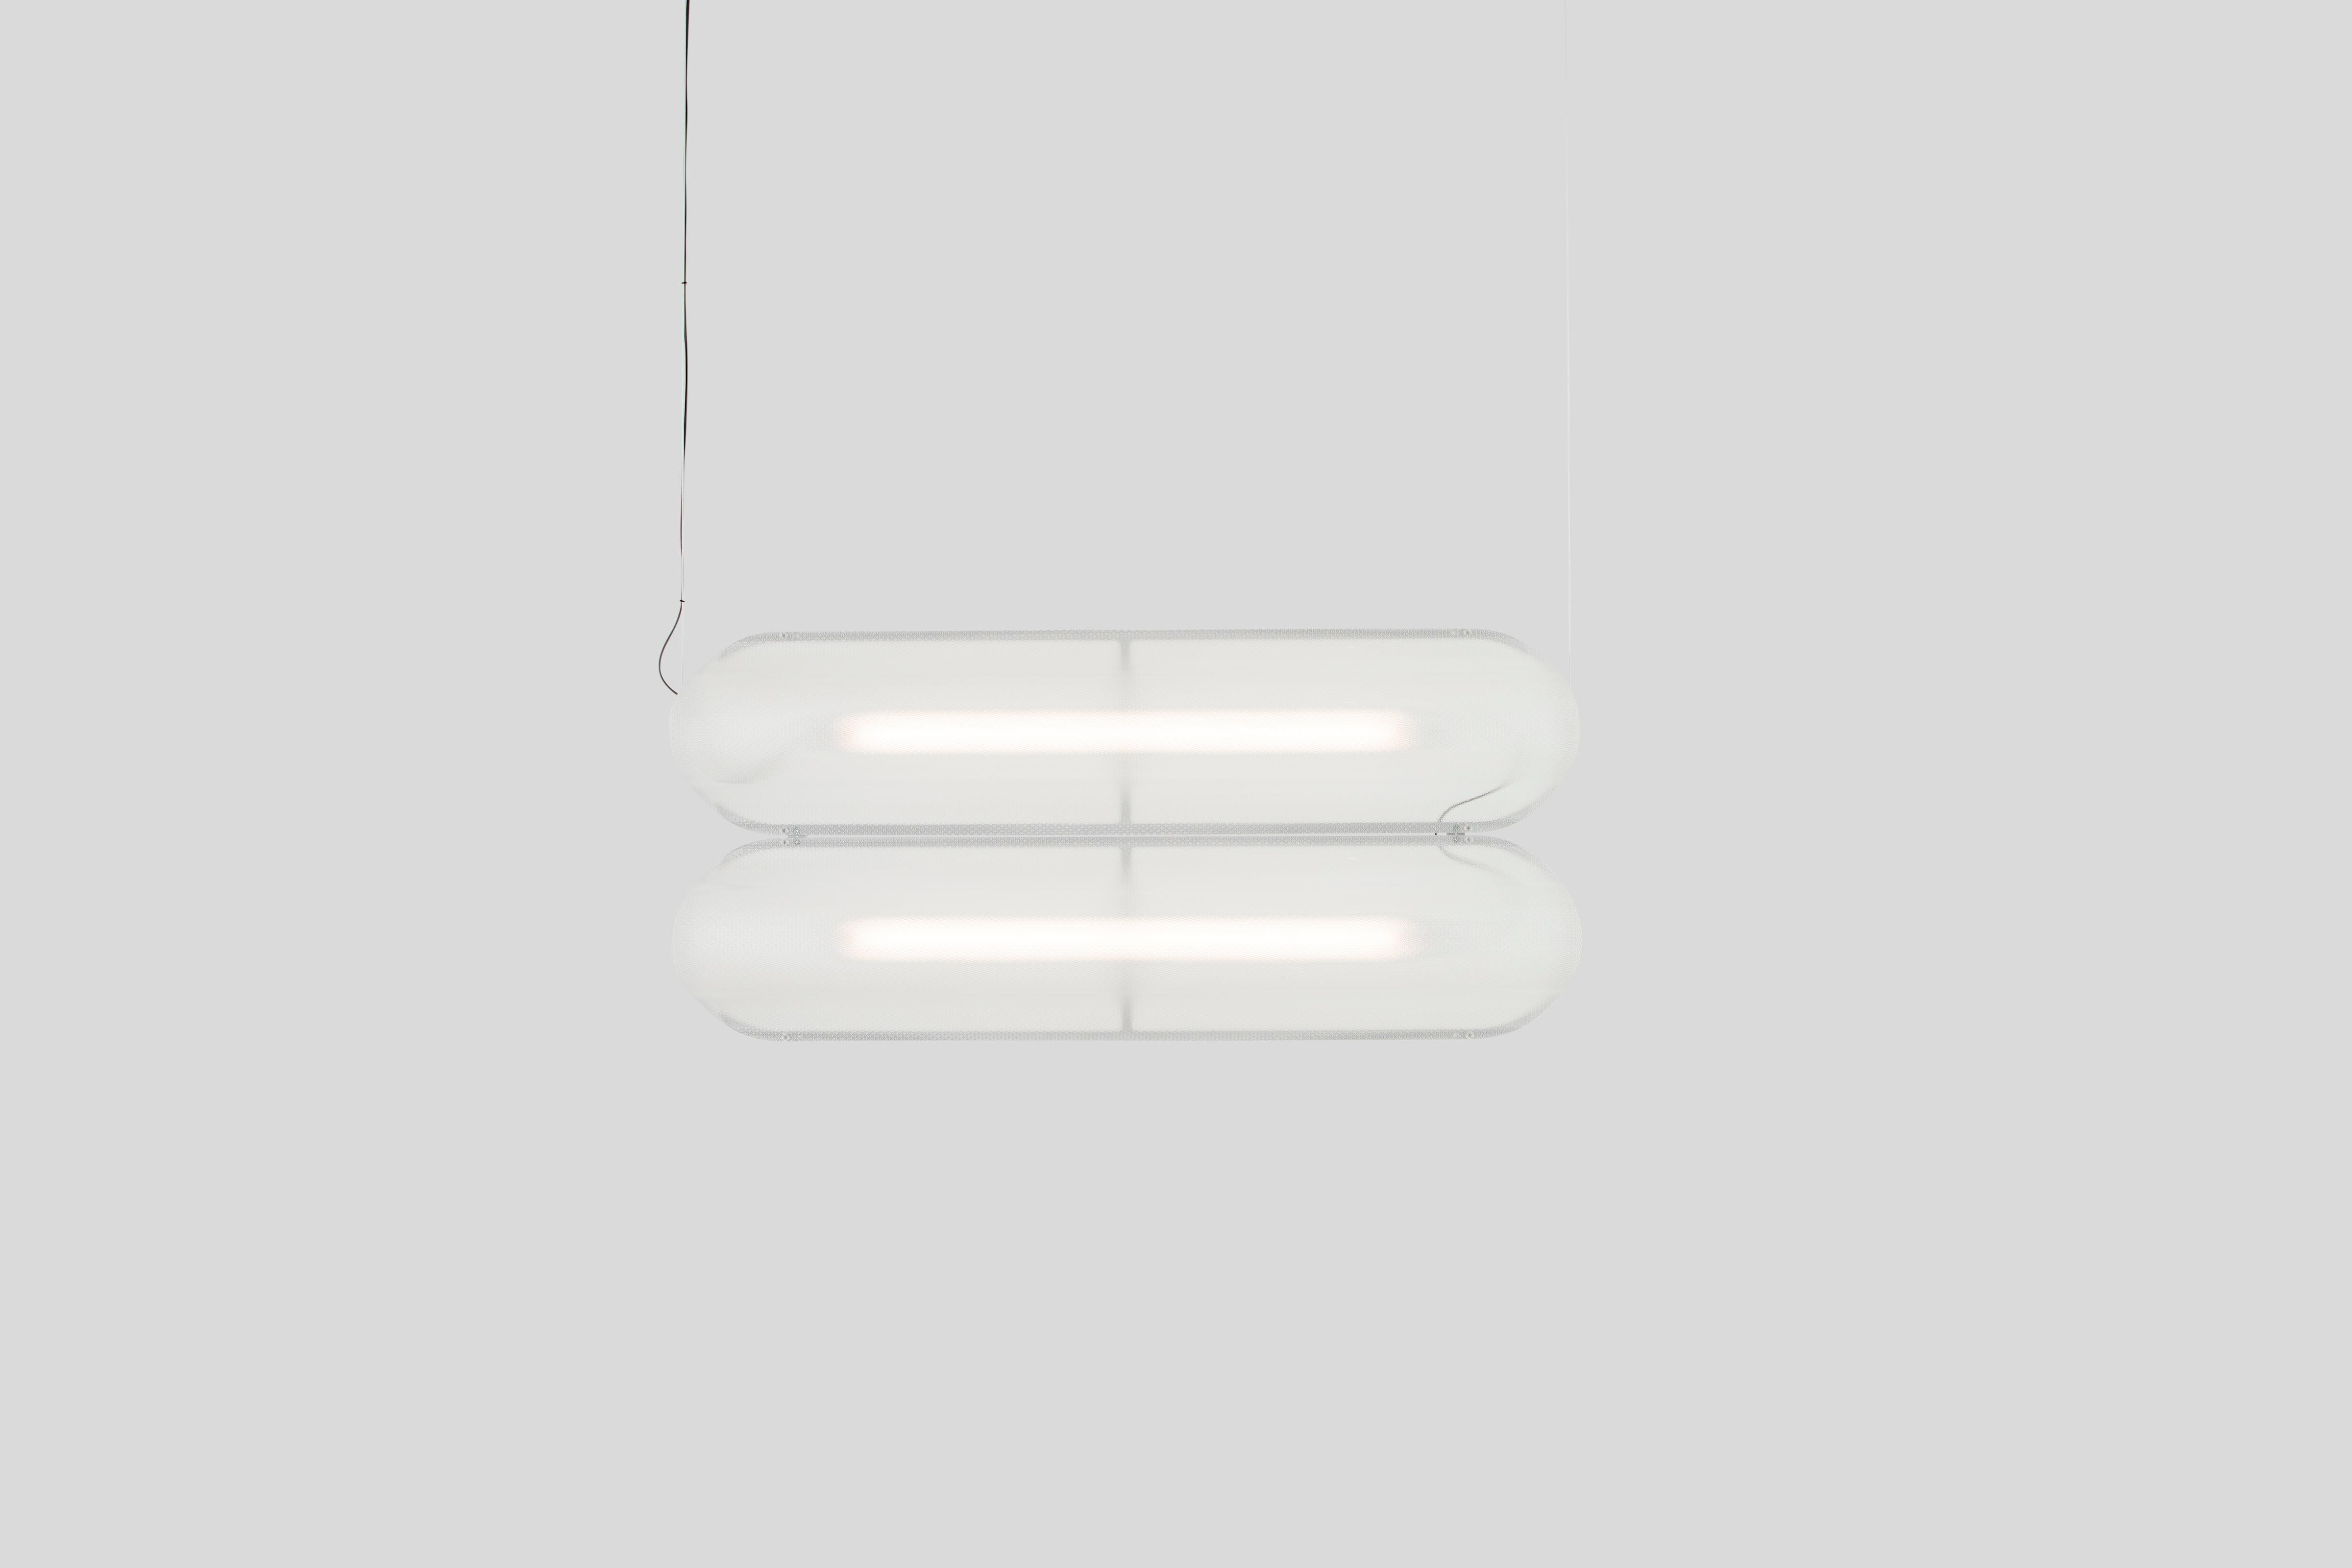 VALE - Pendant lamp
Design: Caine Heintzman, Editor: ANDLight

The Vale series optimises functionality through its multidirectional luminescence while diffusing soft ambient light.

Materials
– Acrylic
– Aluminum

Dimensions:
102 x 30 x 23